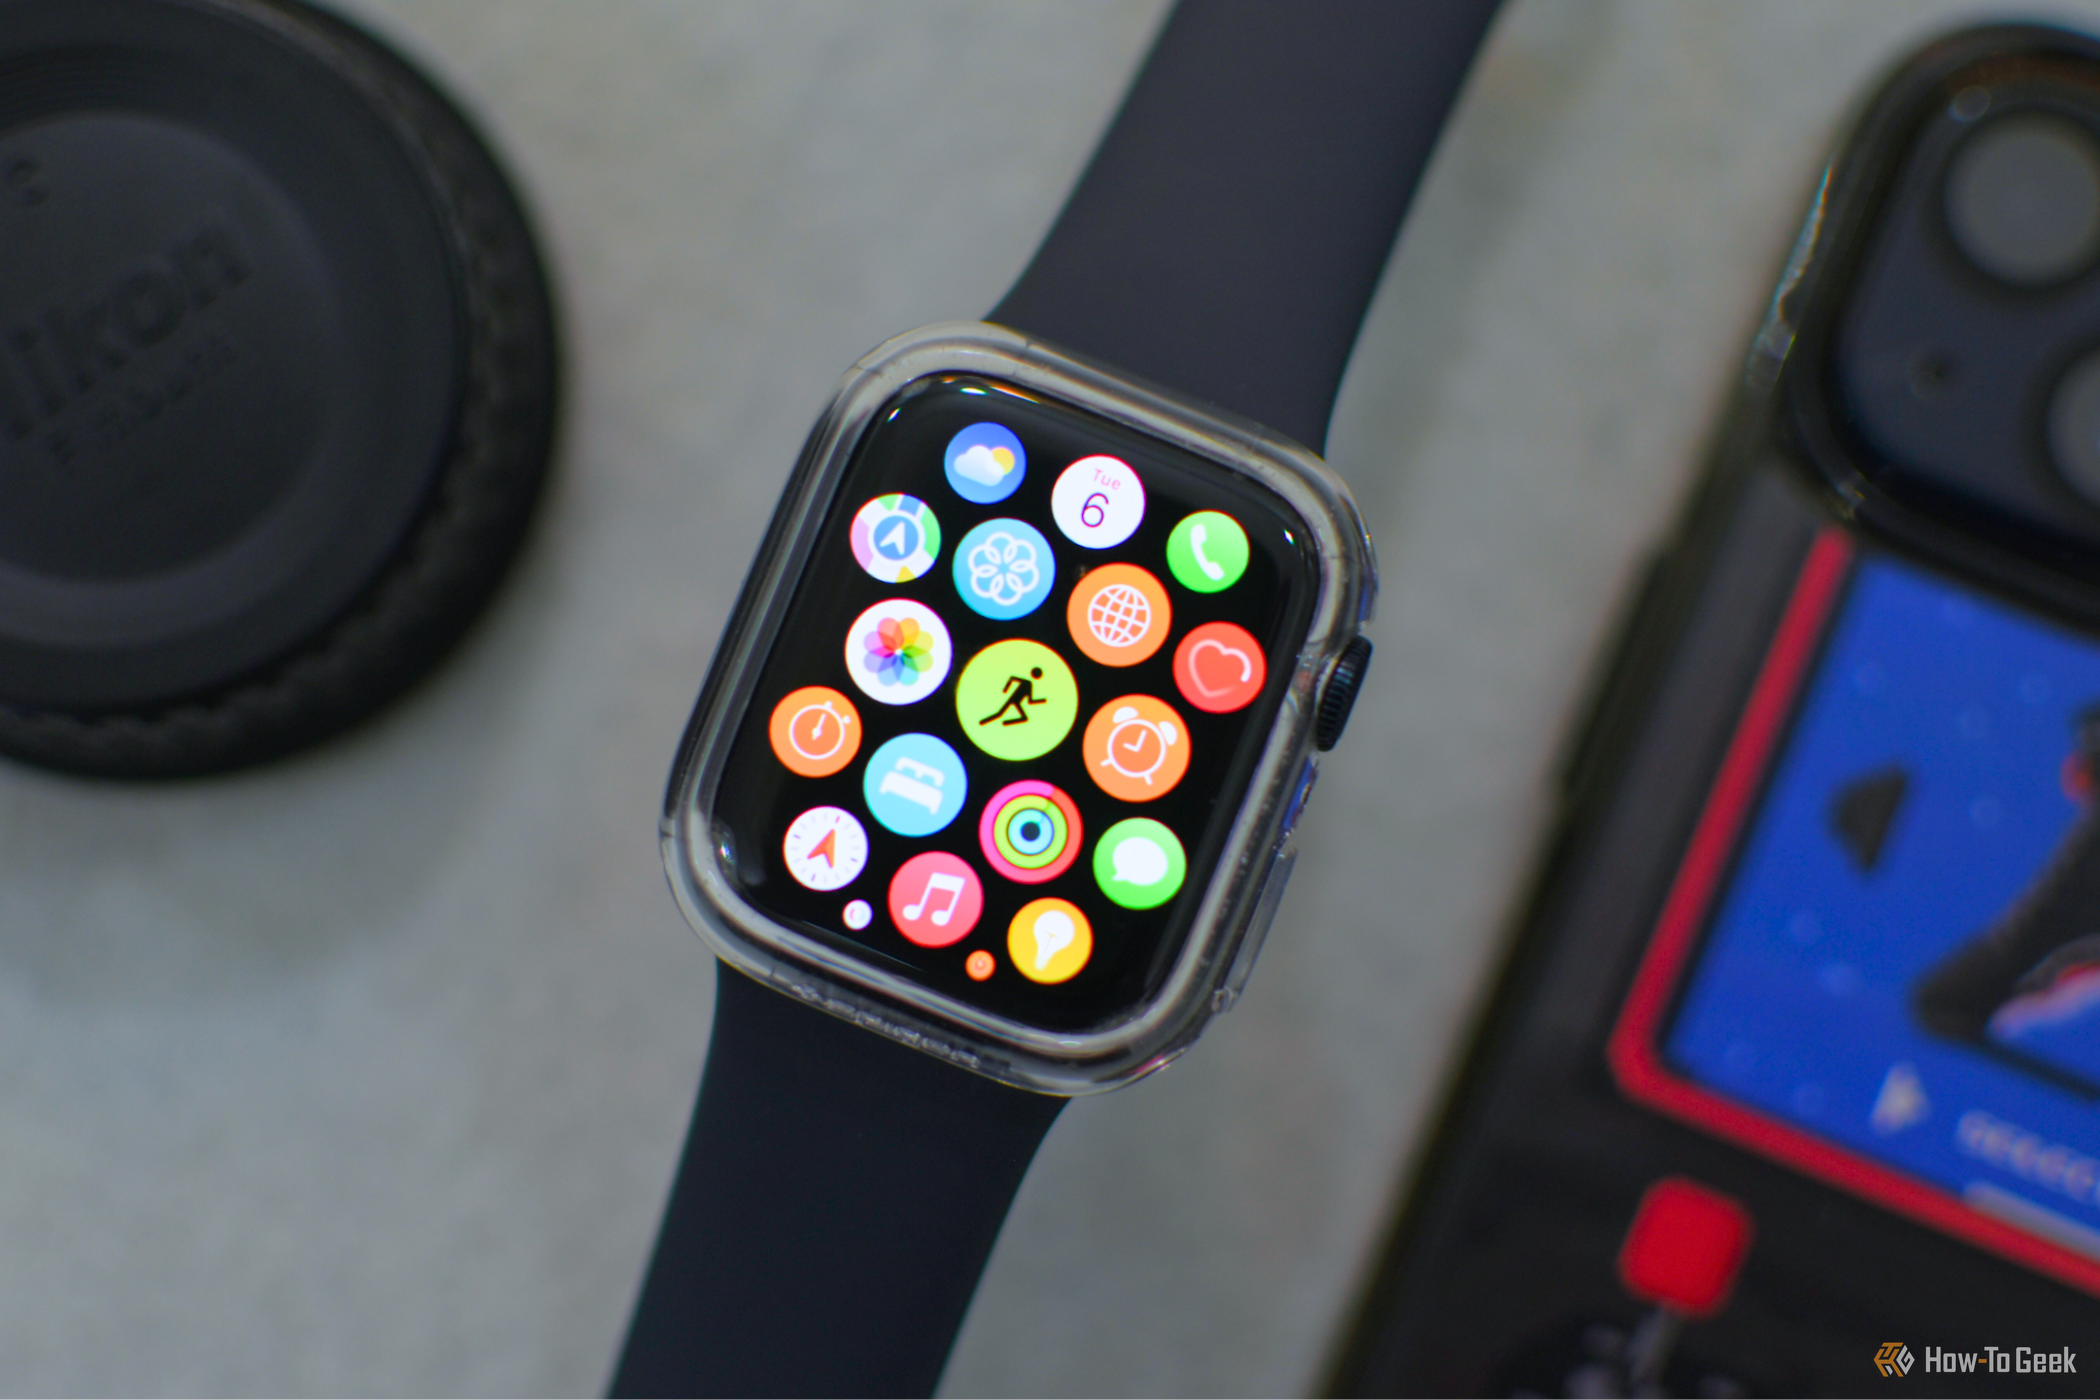 Apple Watch over a gray background with an iPhone and lens cap in the background